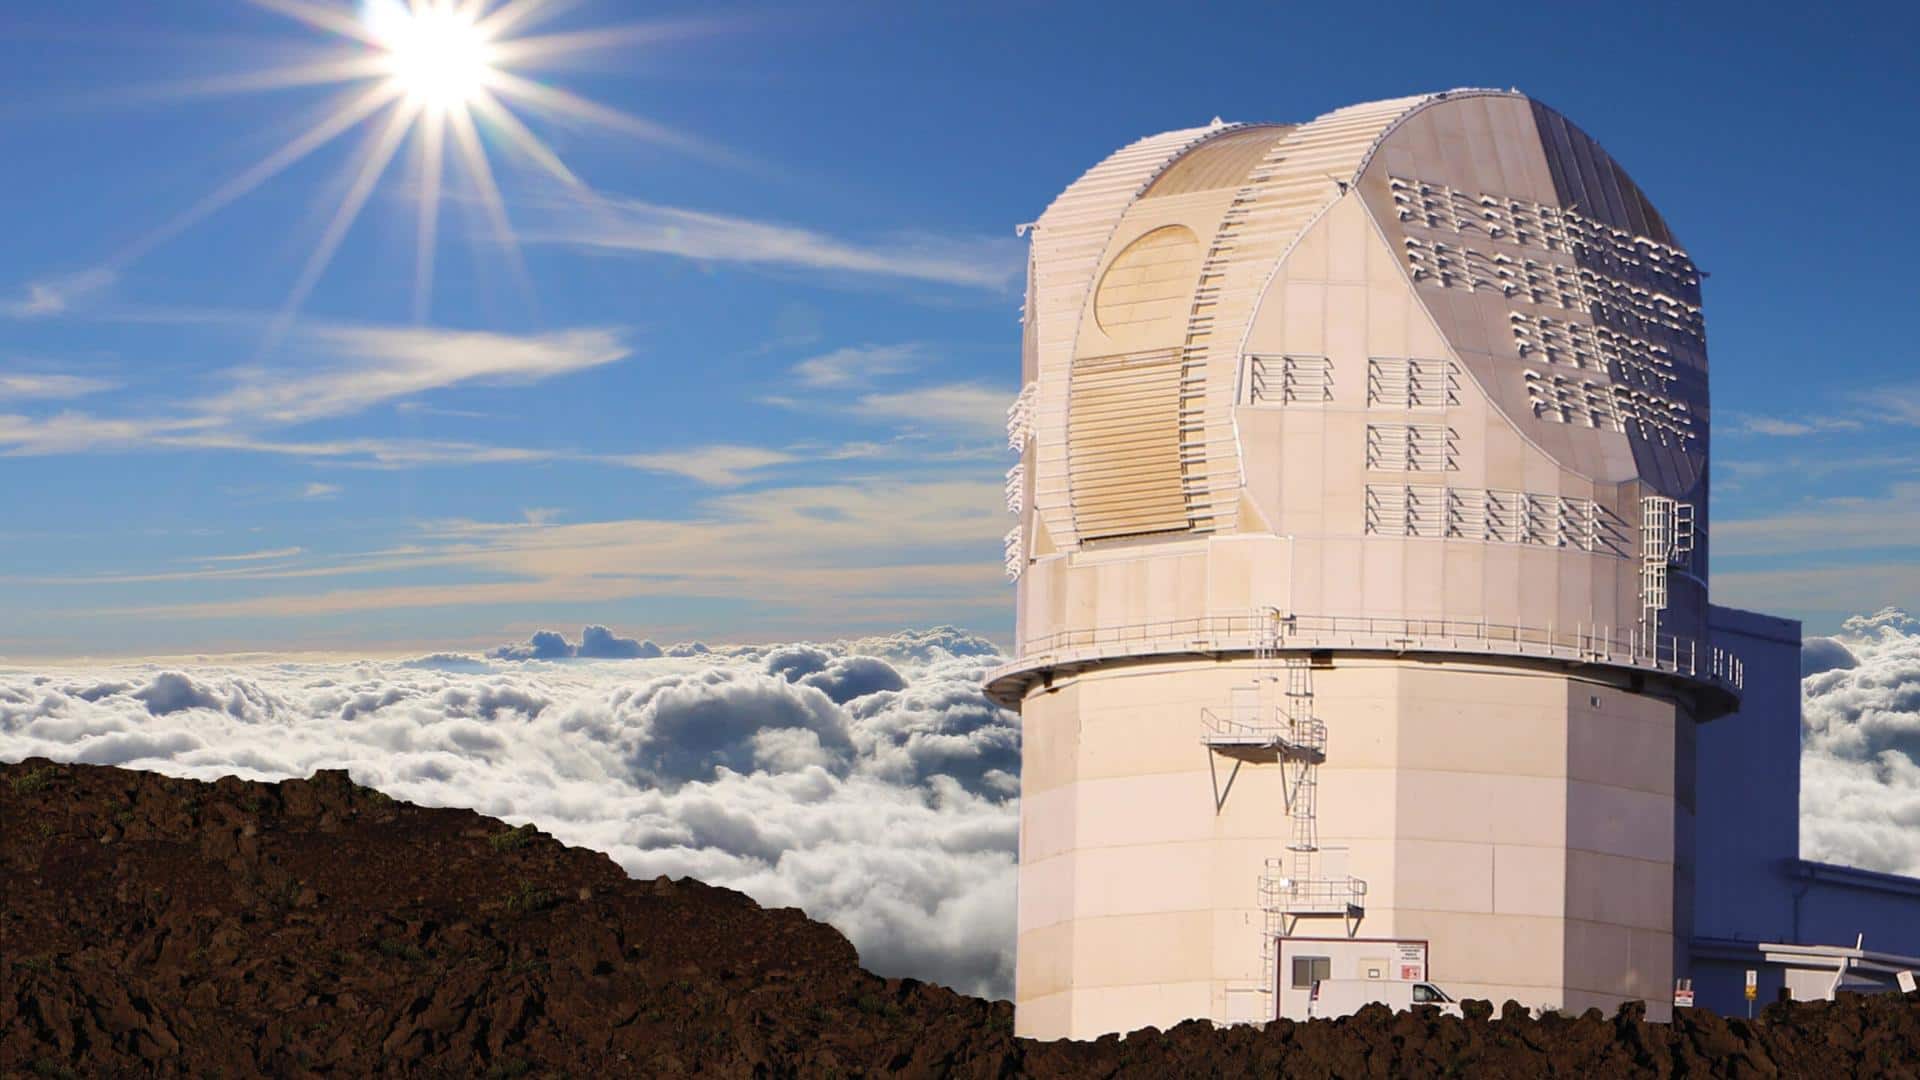 Interesting facts about world's largest solar telescope